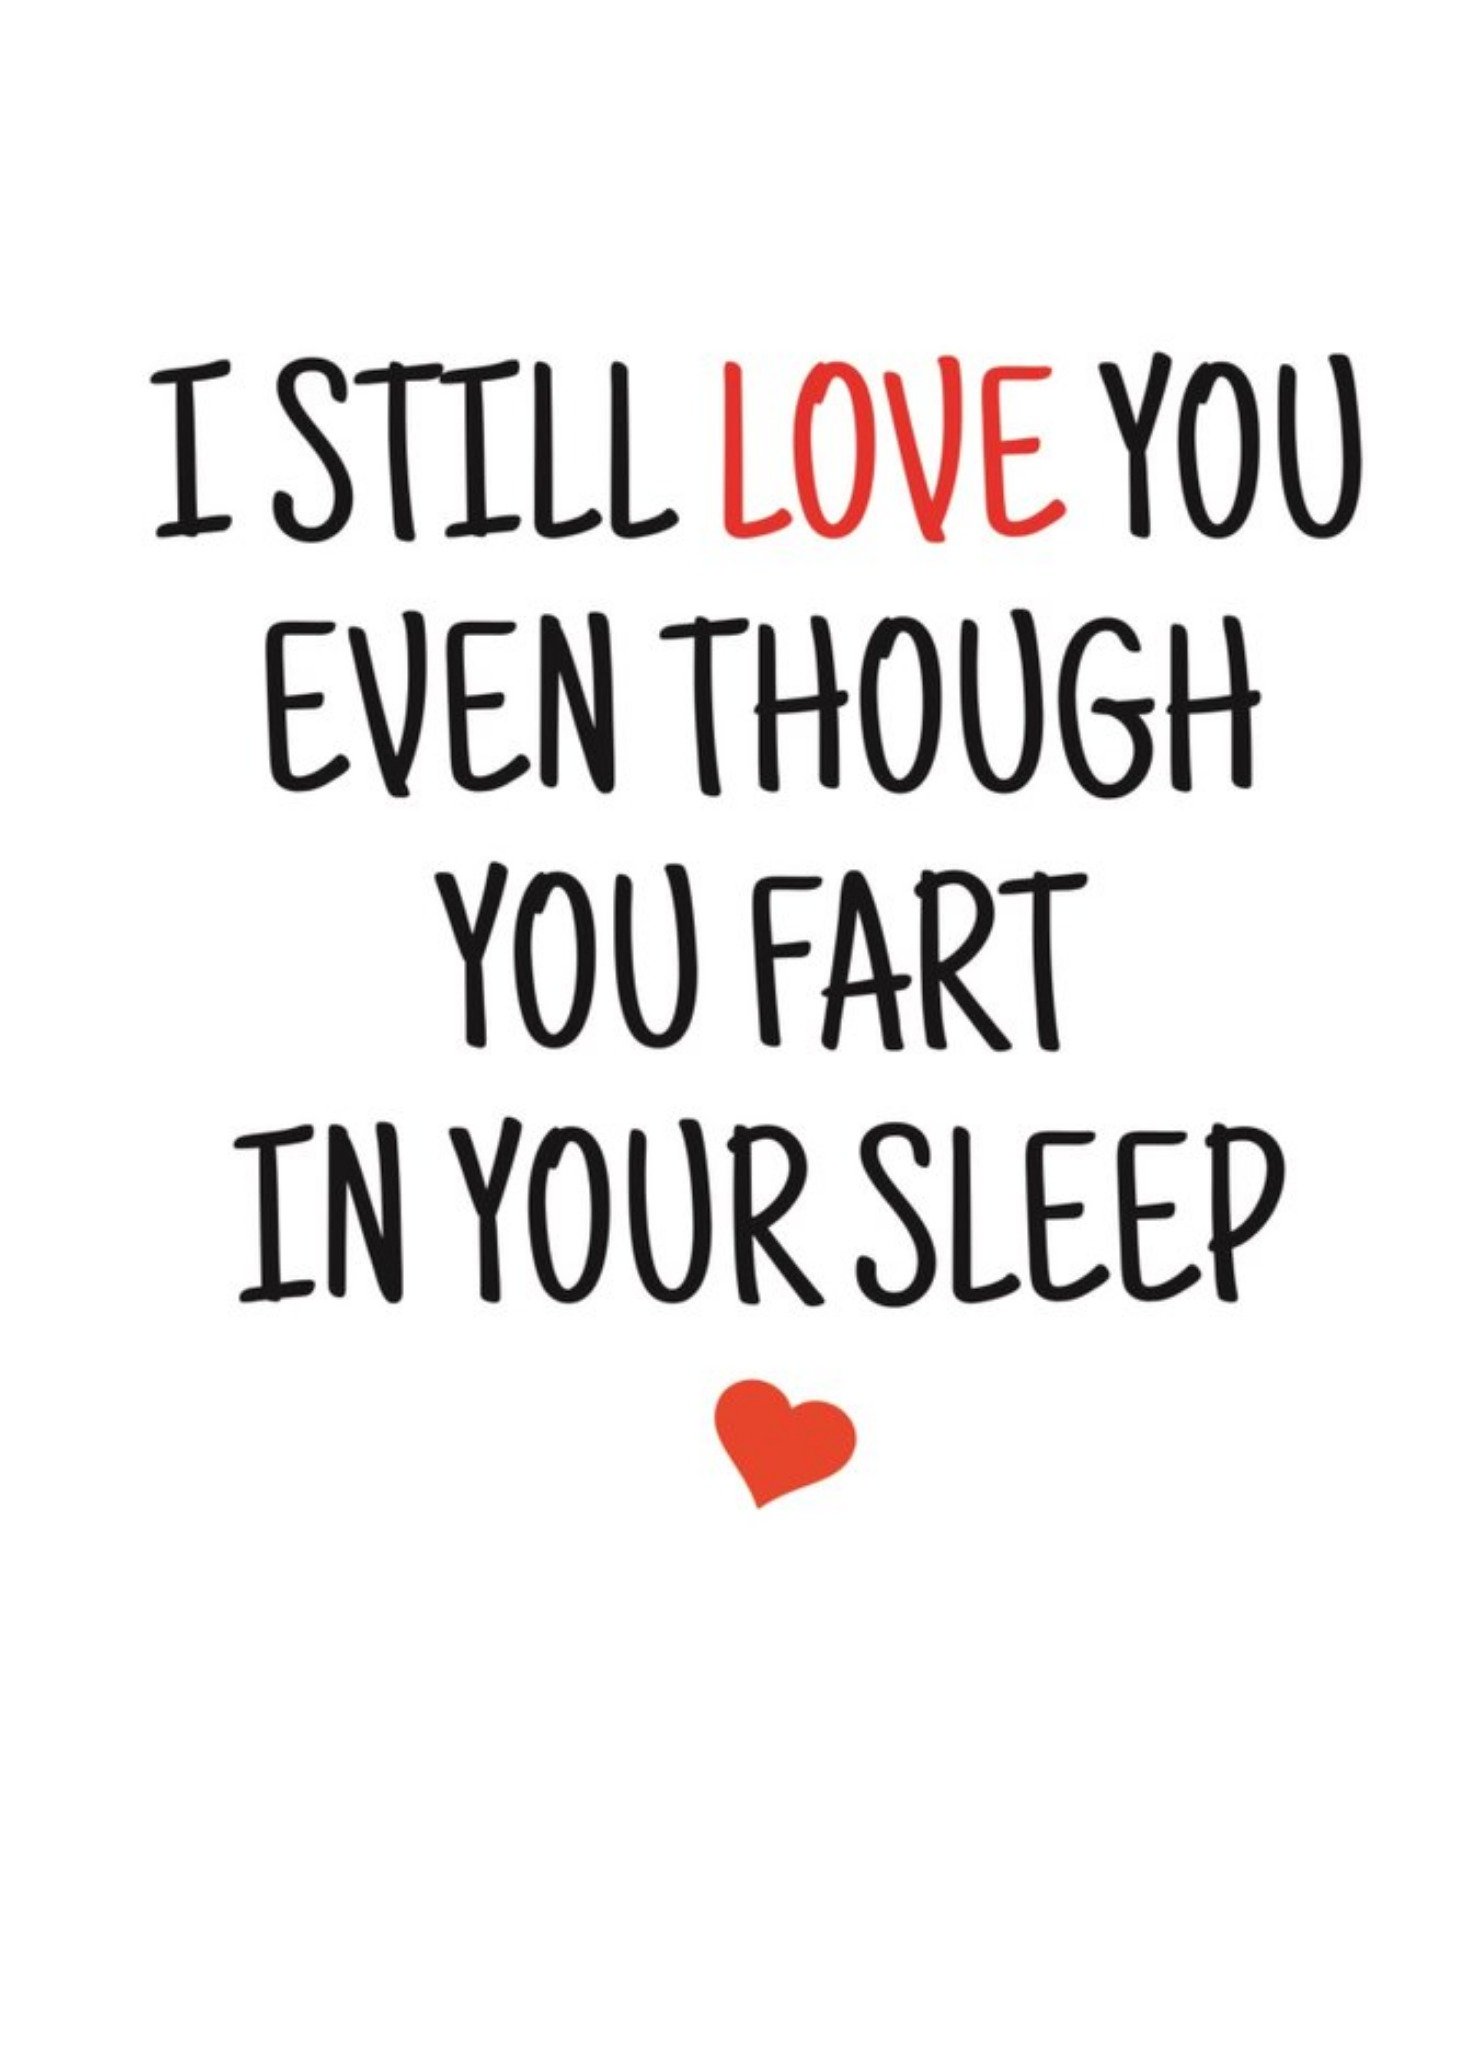 Banter King Typographical I Still Love You Even Though You Fart In Your Sleep Valentines Day Card Ec